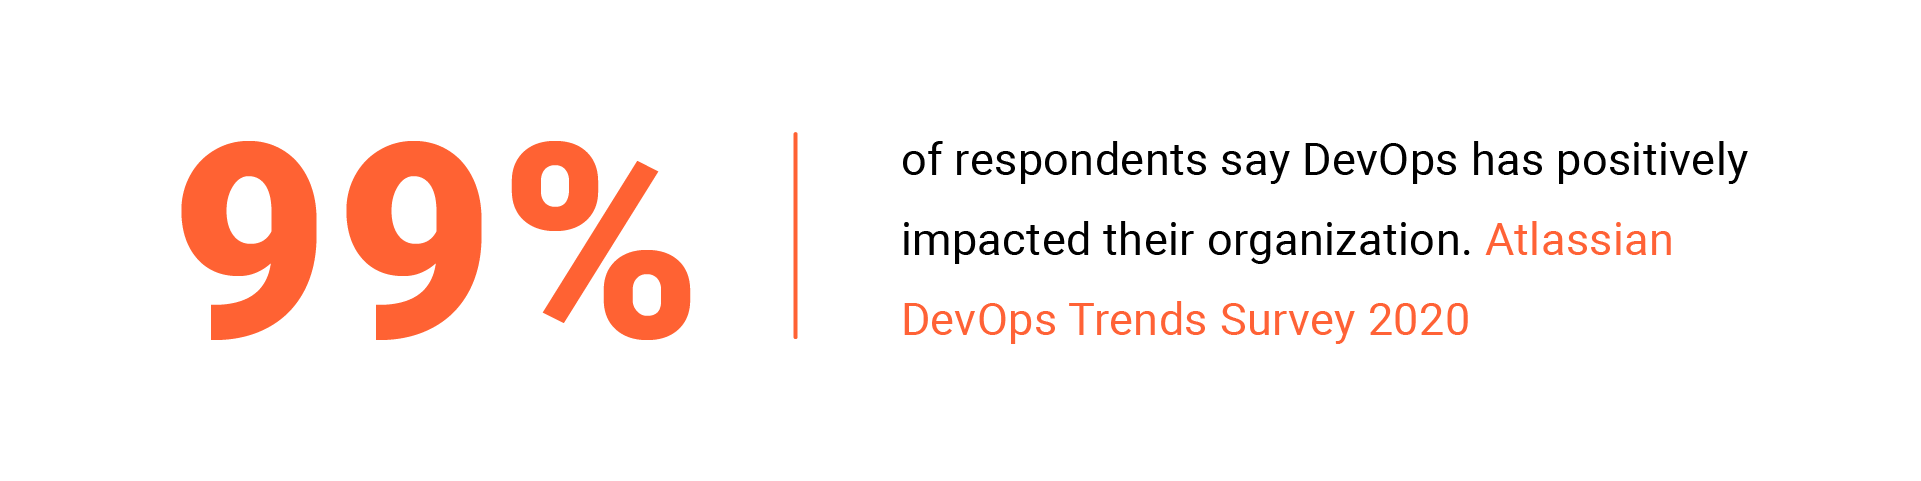 99% of respondents say DevOps outsourcing has positively impacted their organization